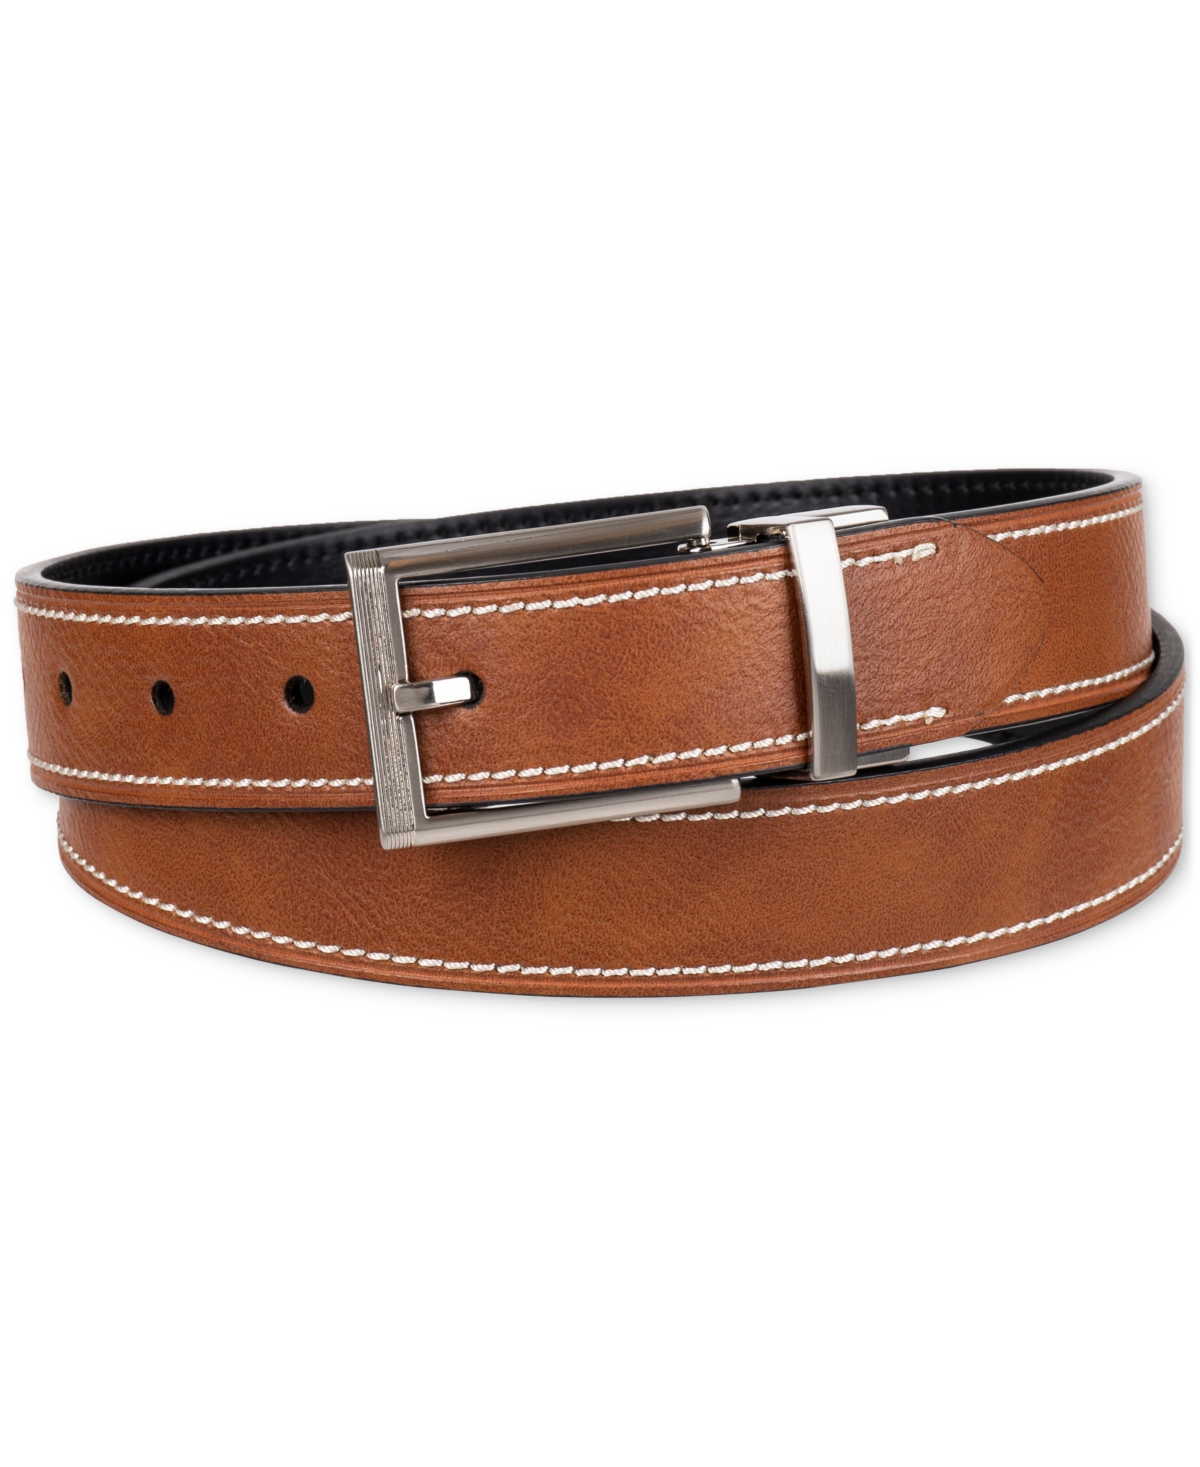 Men's Two-In-One Reversible Contrast Stitch Belt, Created for Macy's - Black/Tan